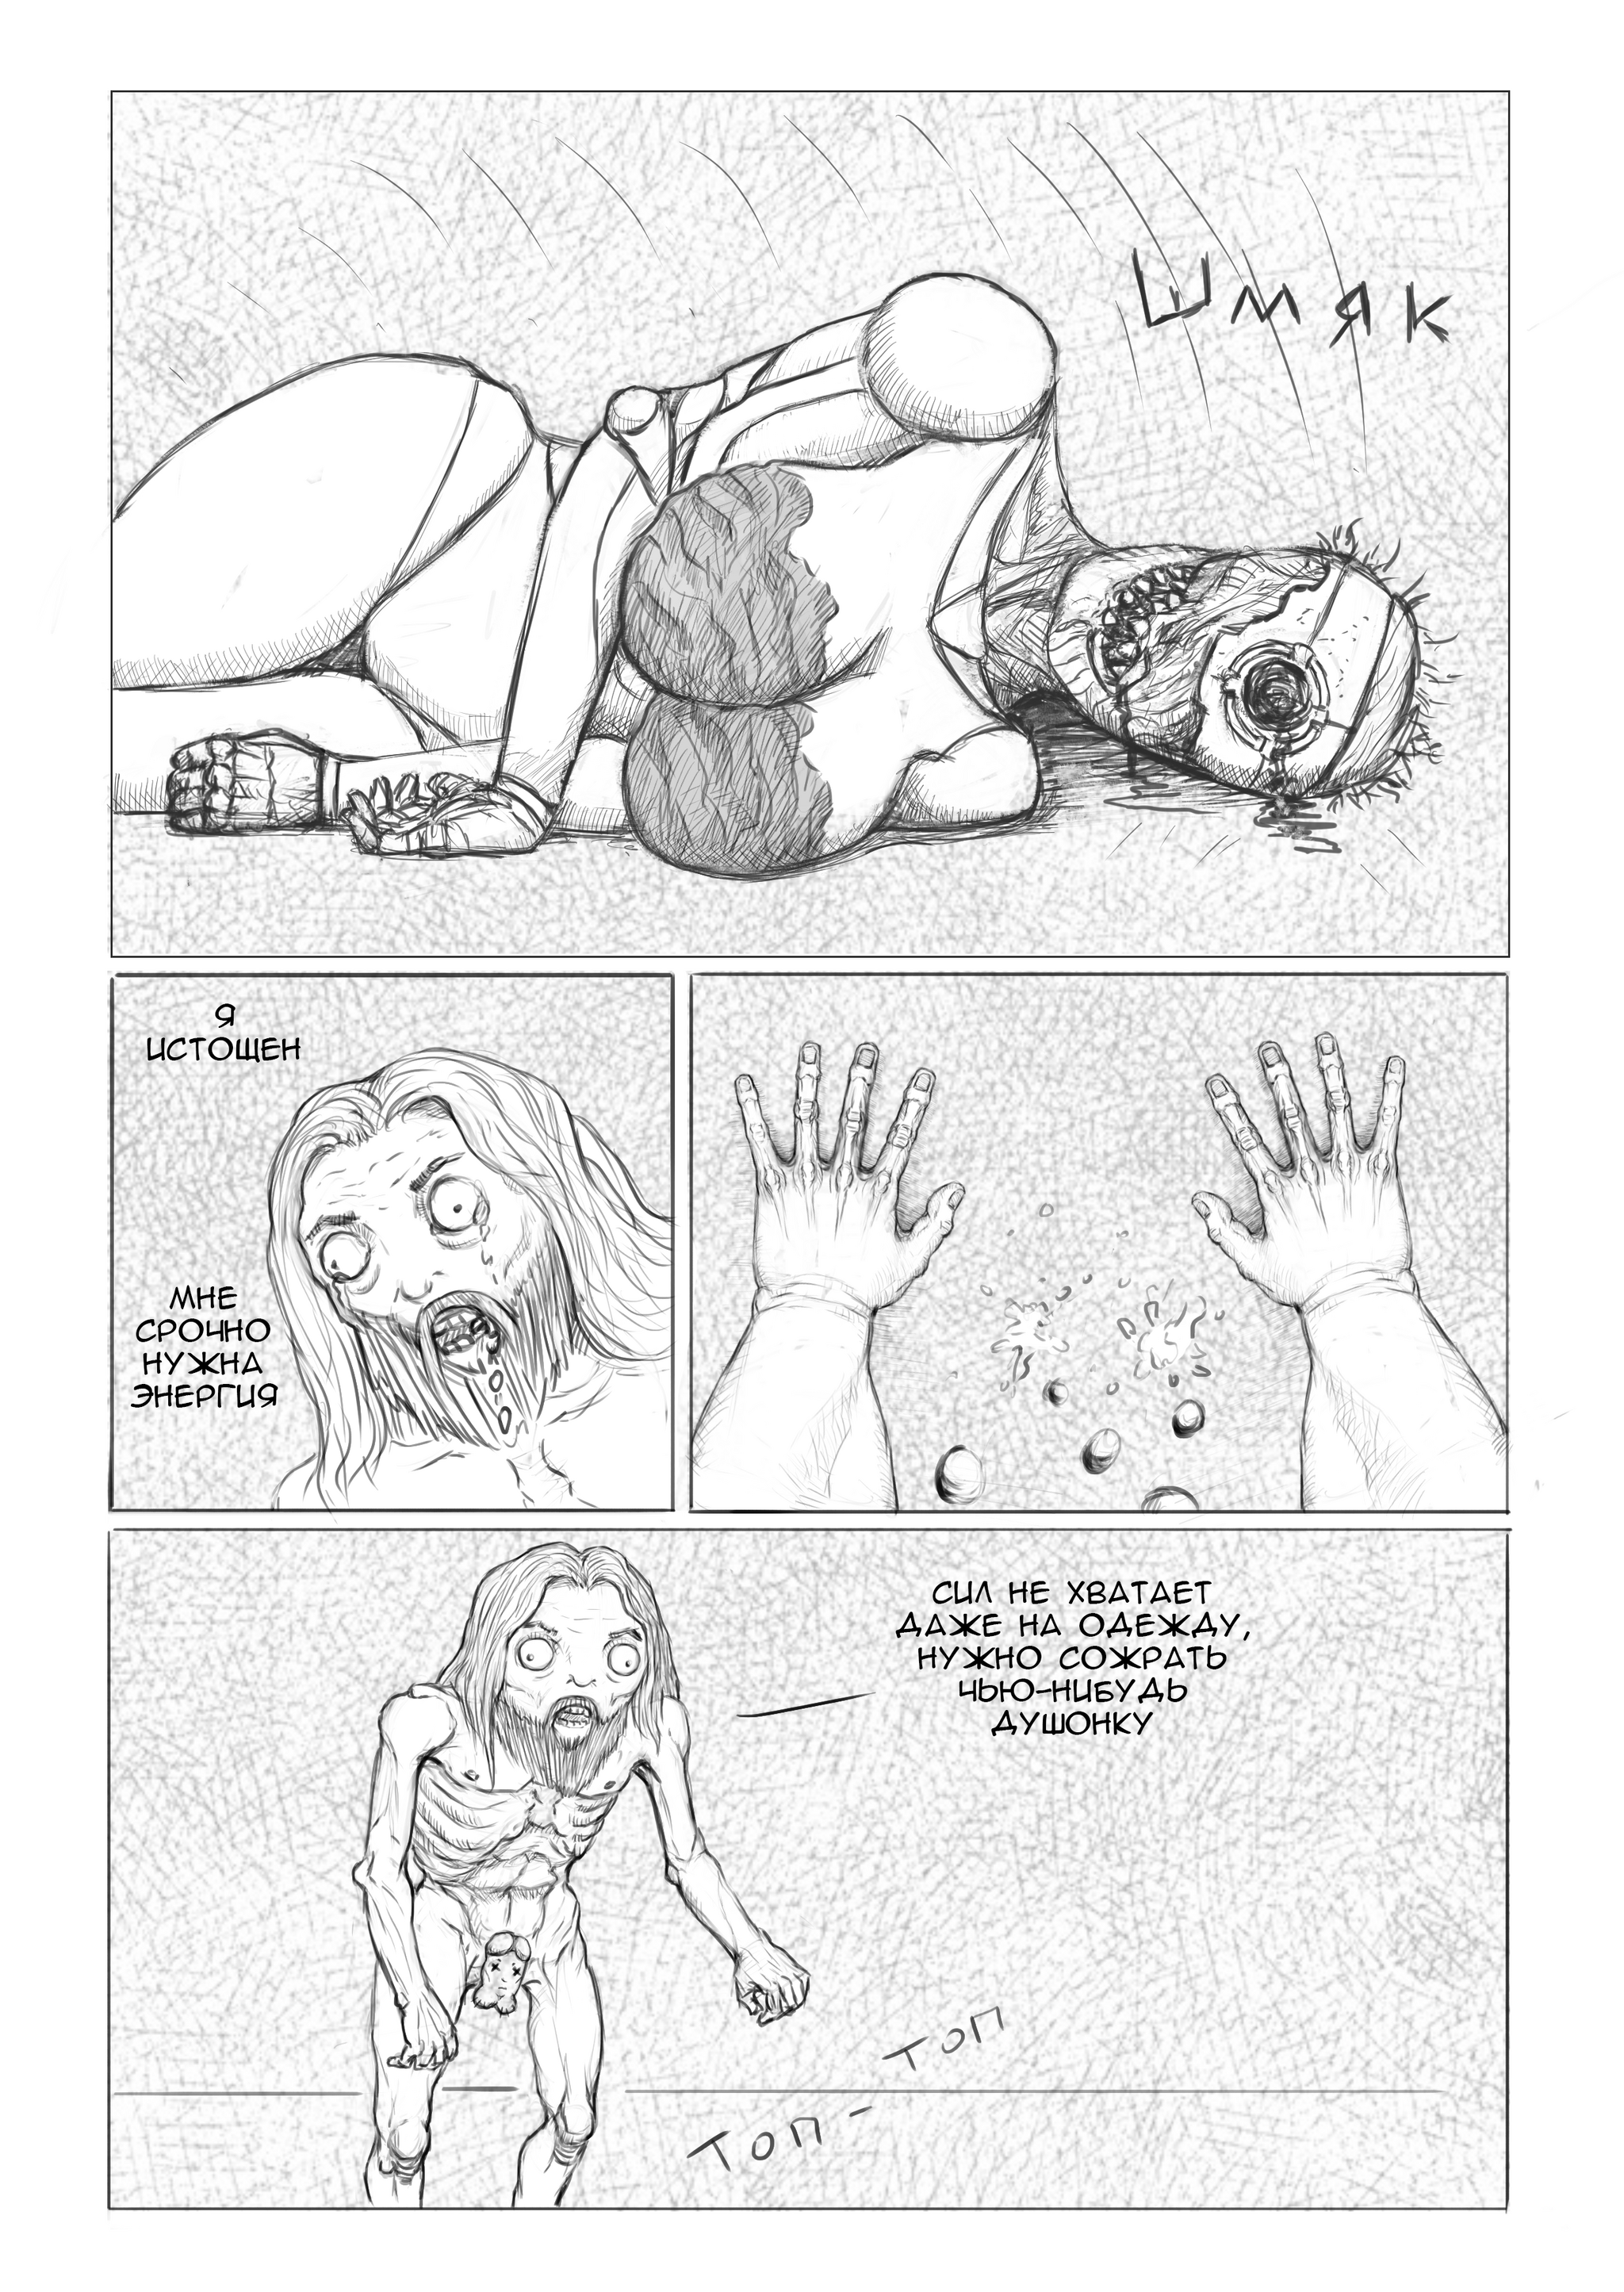 Daily Life in Hell (382-394) - NSFW, My, Daily Life in Hell, Manga, Comics, Author's comic, Painting, Longpost